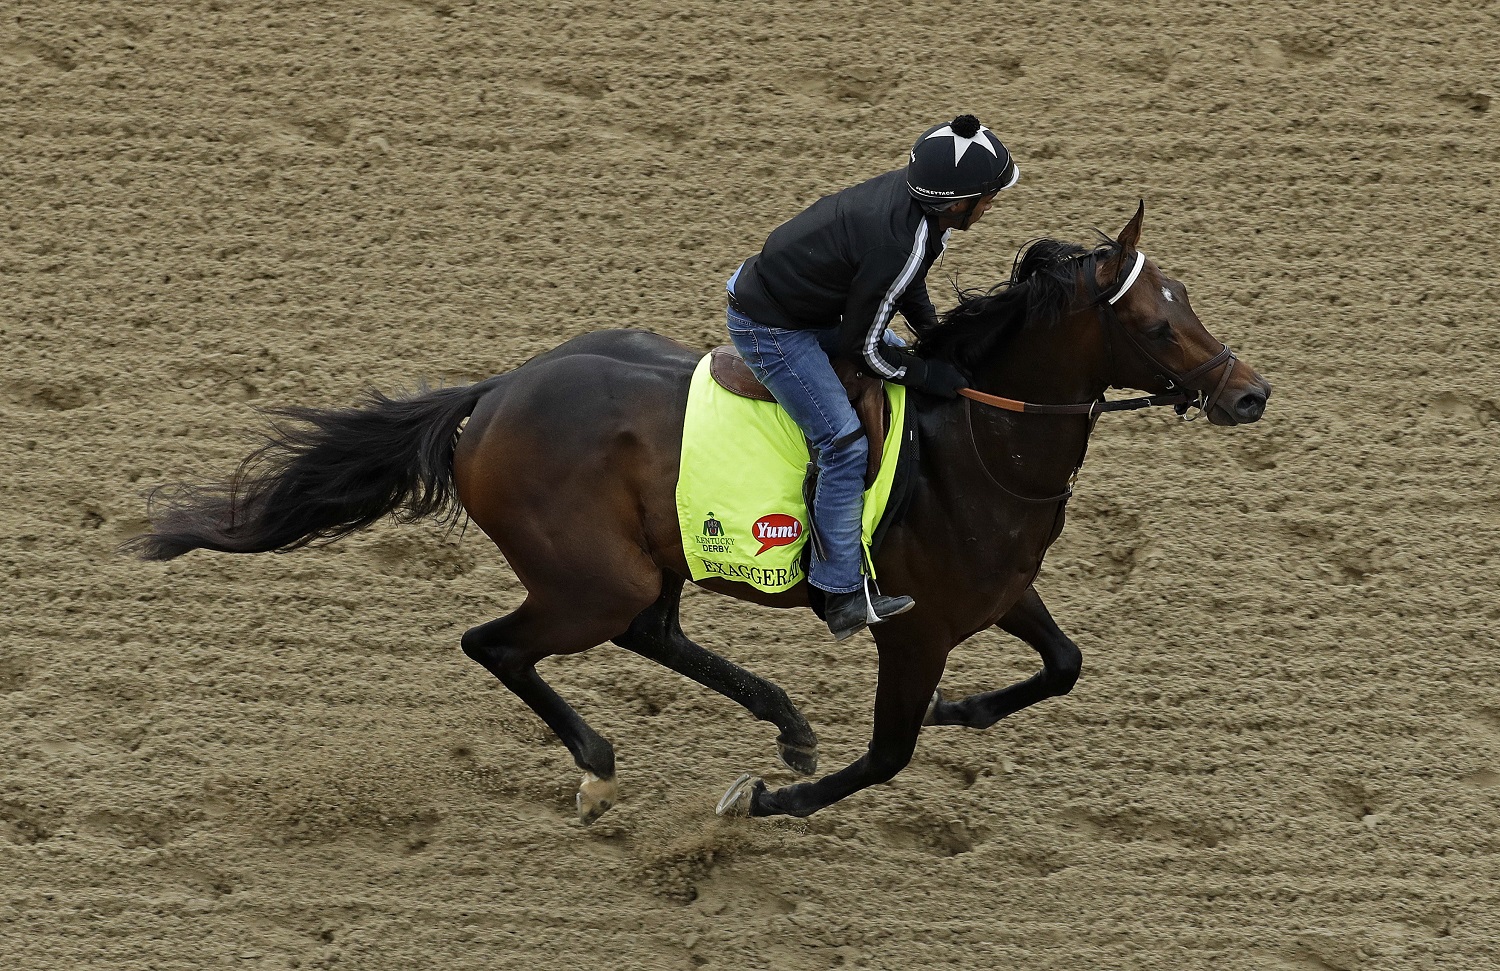 Exercise rider Peedy Landry rides Kentucky Derby hopeful Exaggerator during a workout at Churchill Downs Wednesday, May 4, 2016, in Louisville, Ky. The 142nd running of the Kentucky Derby is scheduled for Saturday, May 7. (AP Photo/Charlie Riedel)